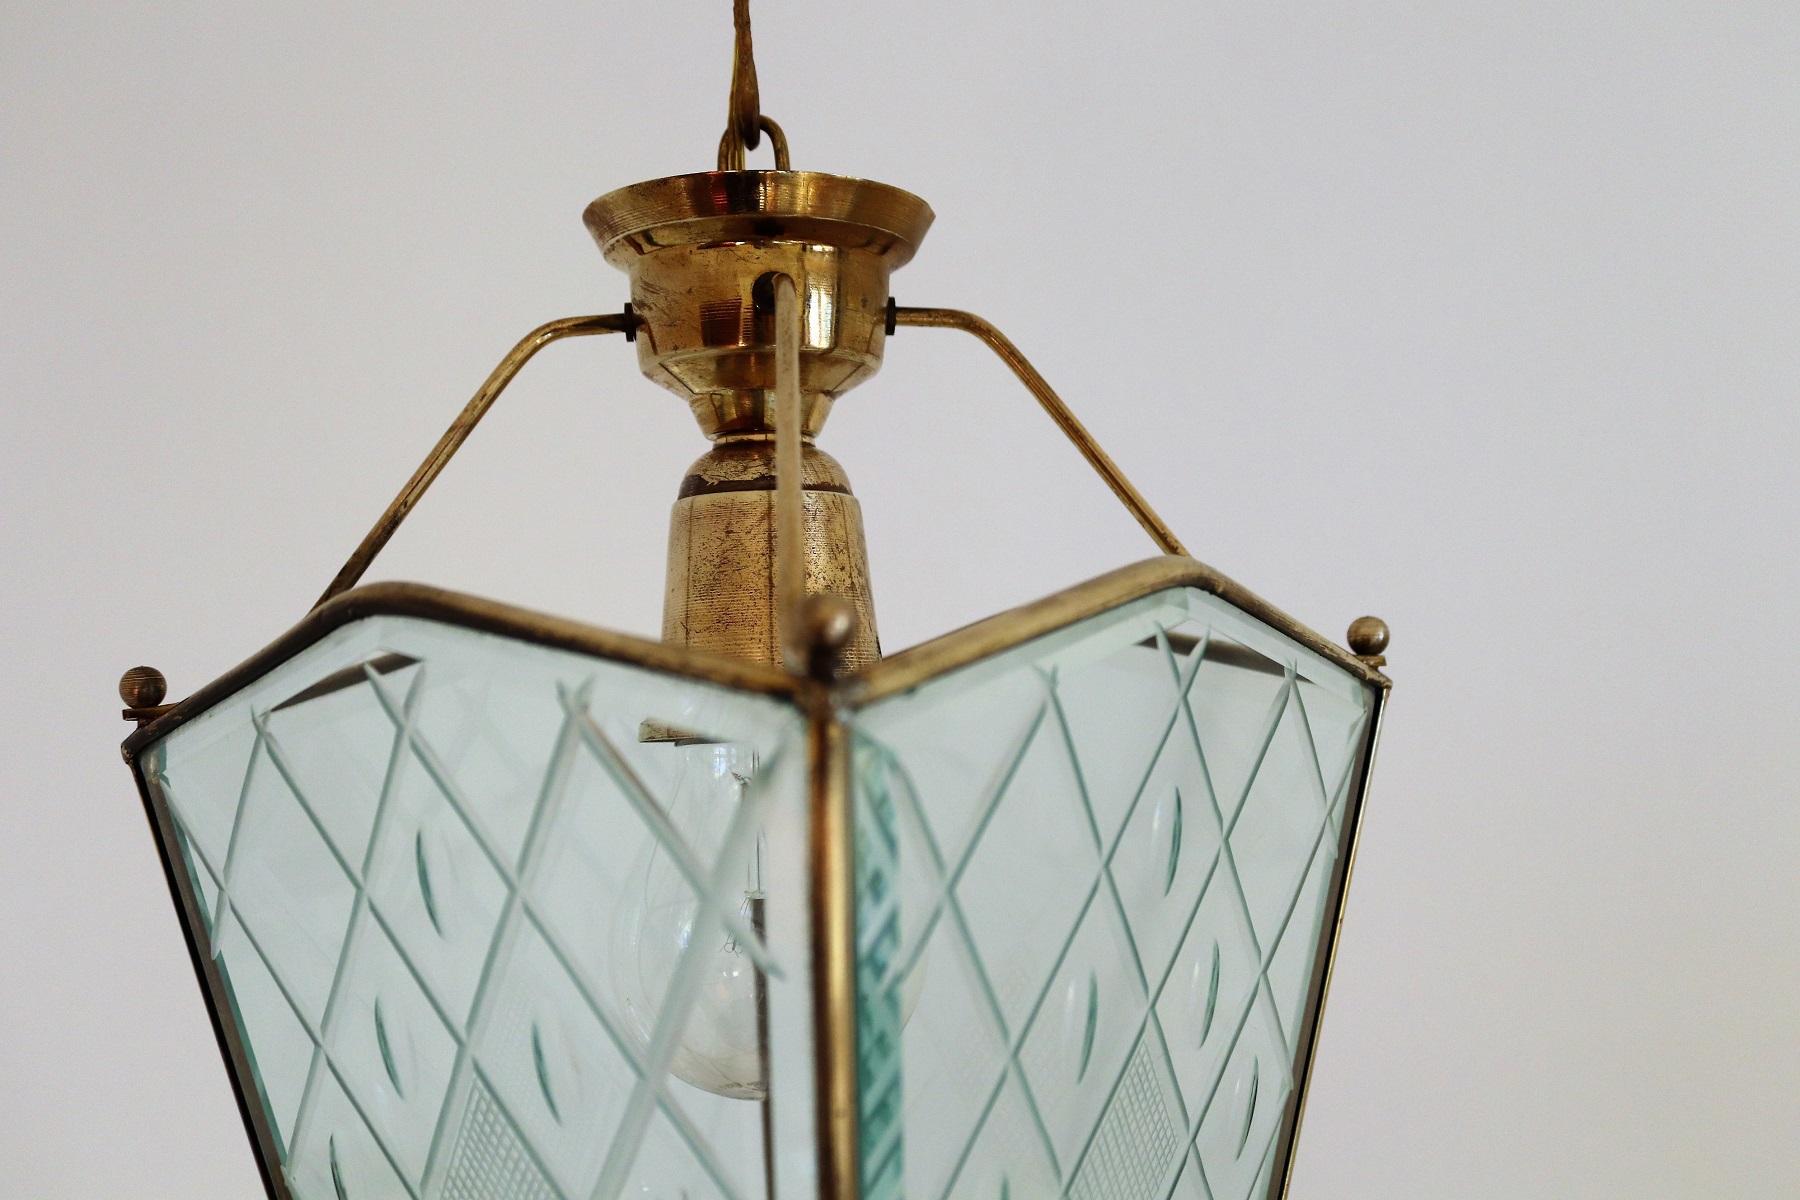 Italian Vintage Lantern in Crystal Cut Glass and Brass, 1950s For Sale 3